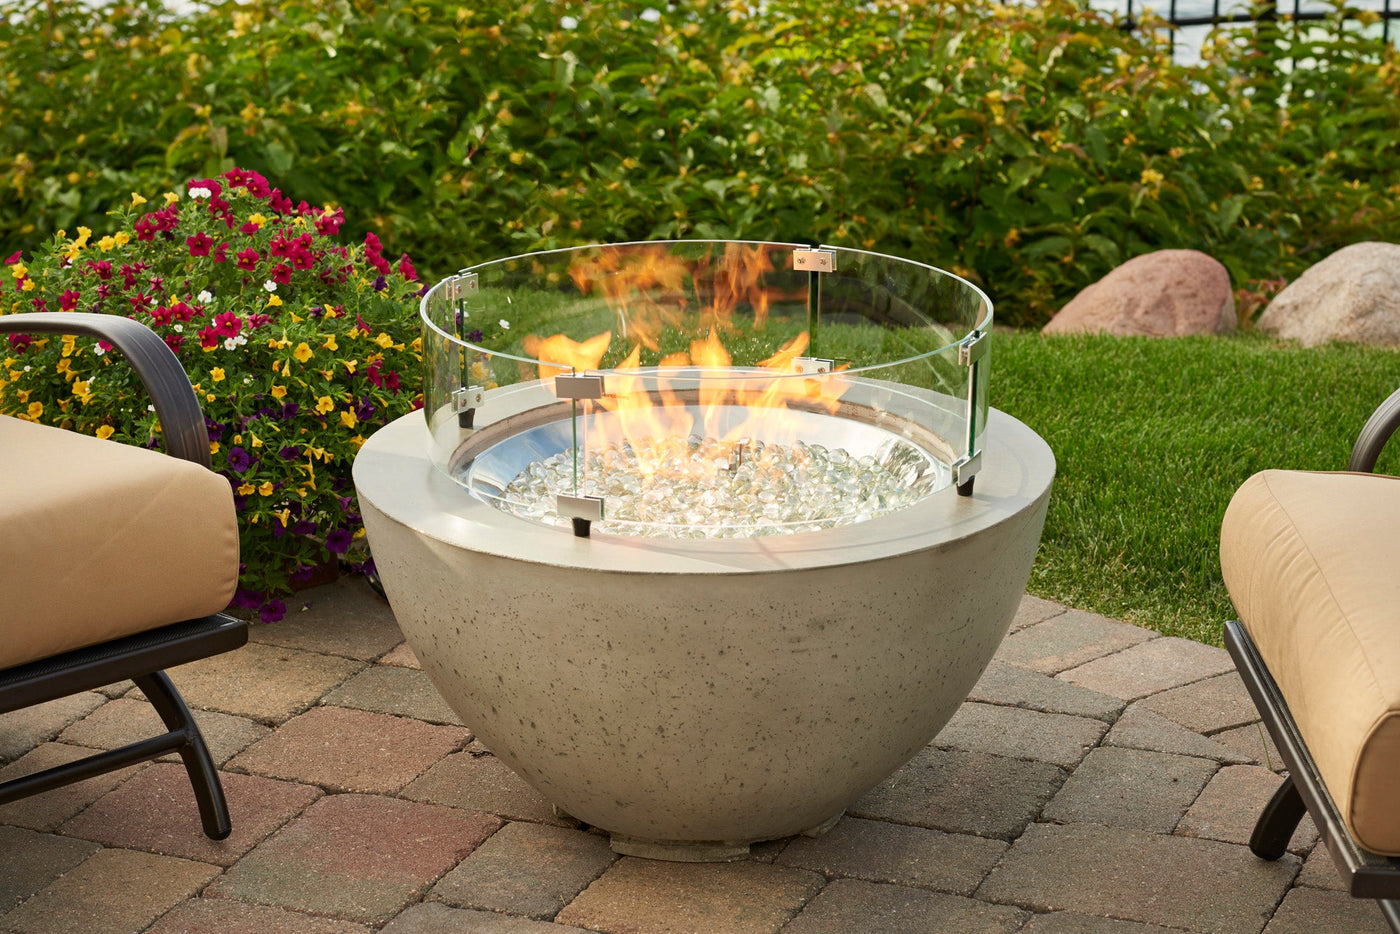 The Outdoor GreatRoom Company Cove 29" Round Gas Fire Pit Bowl